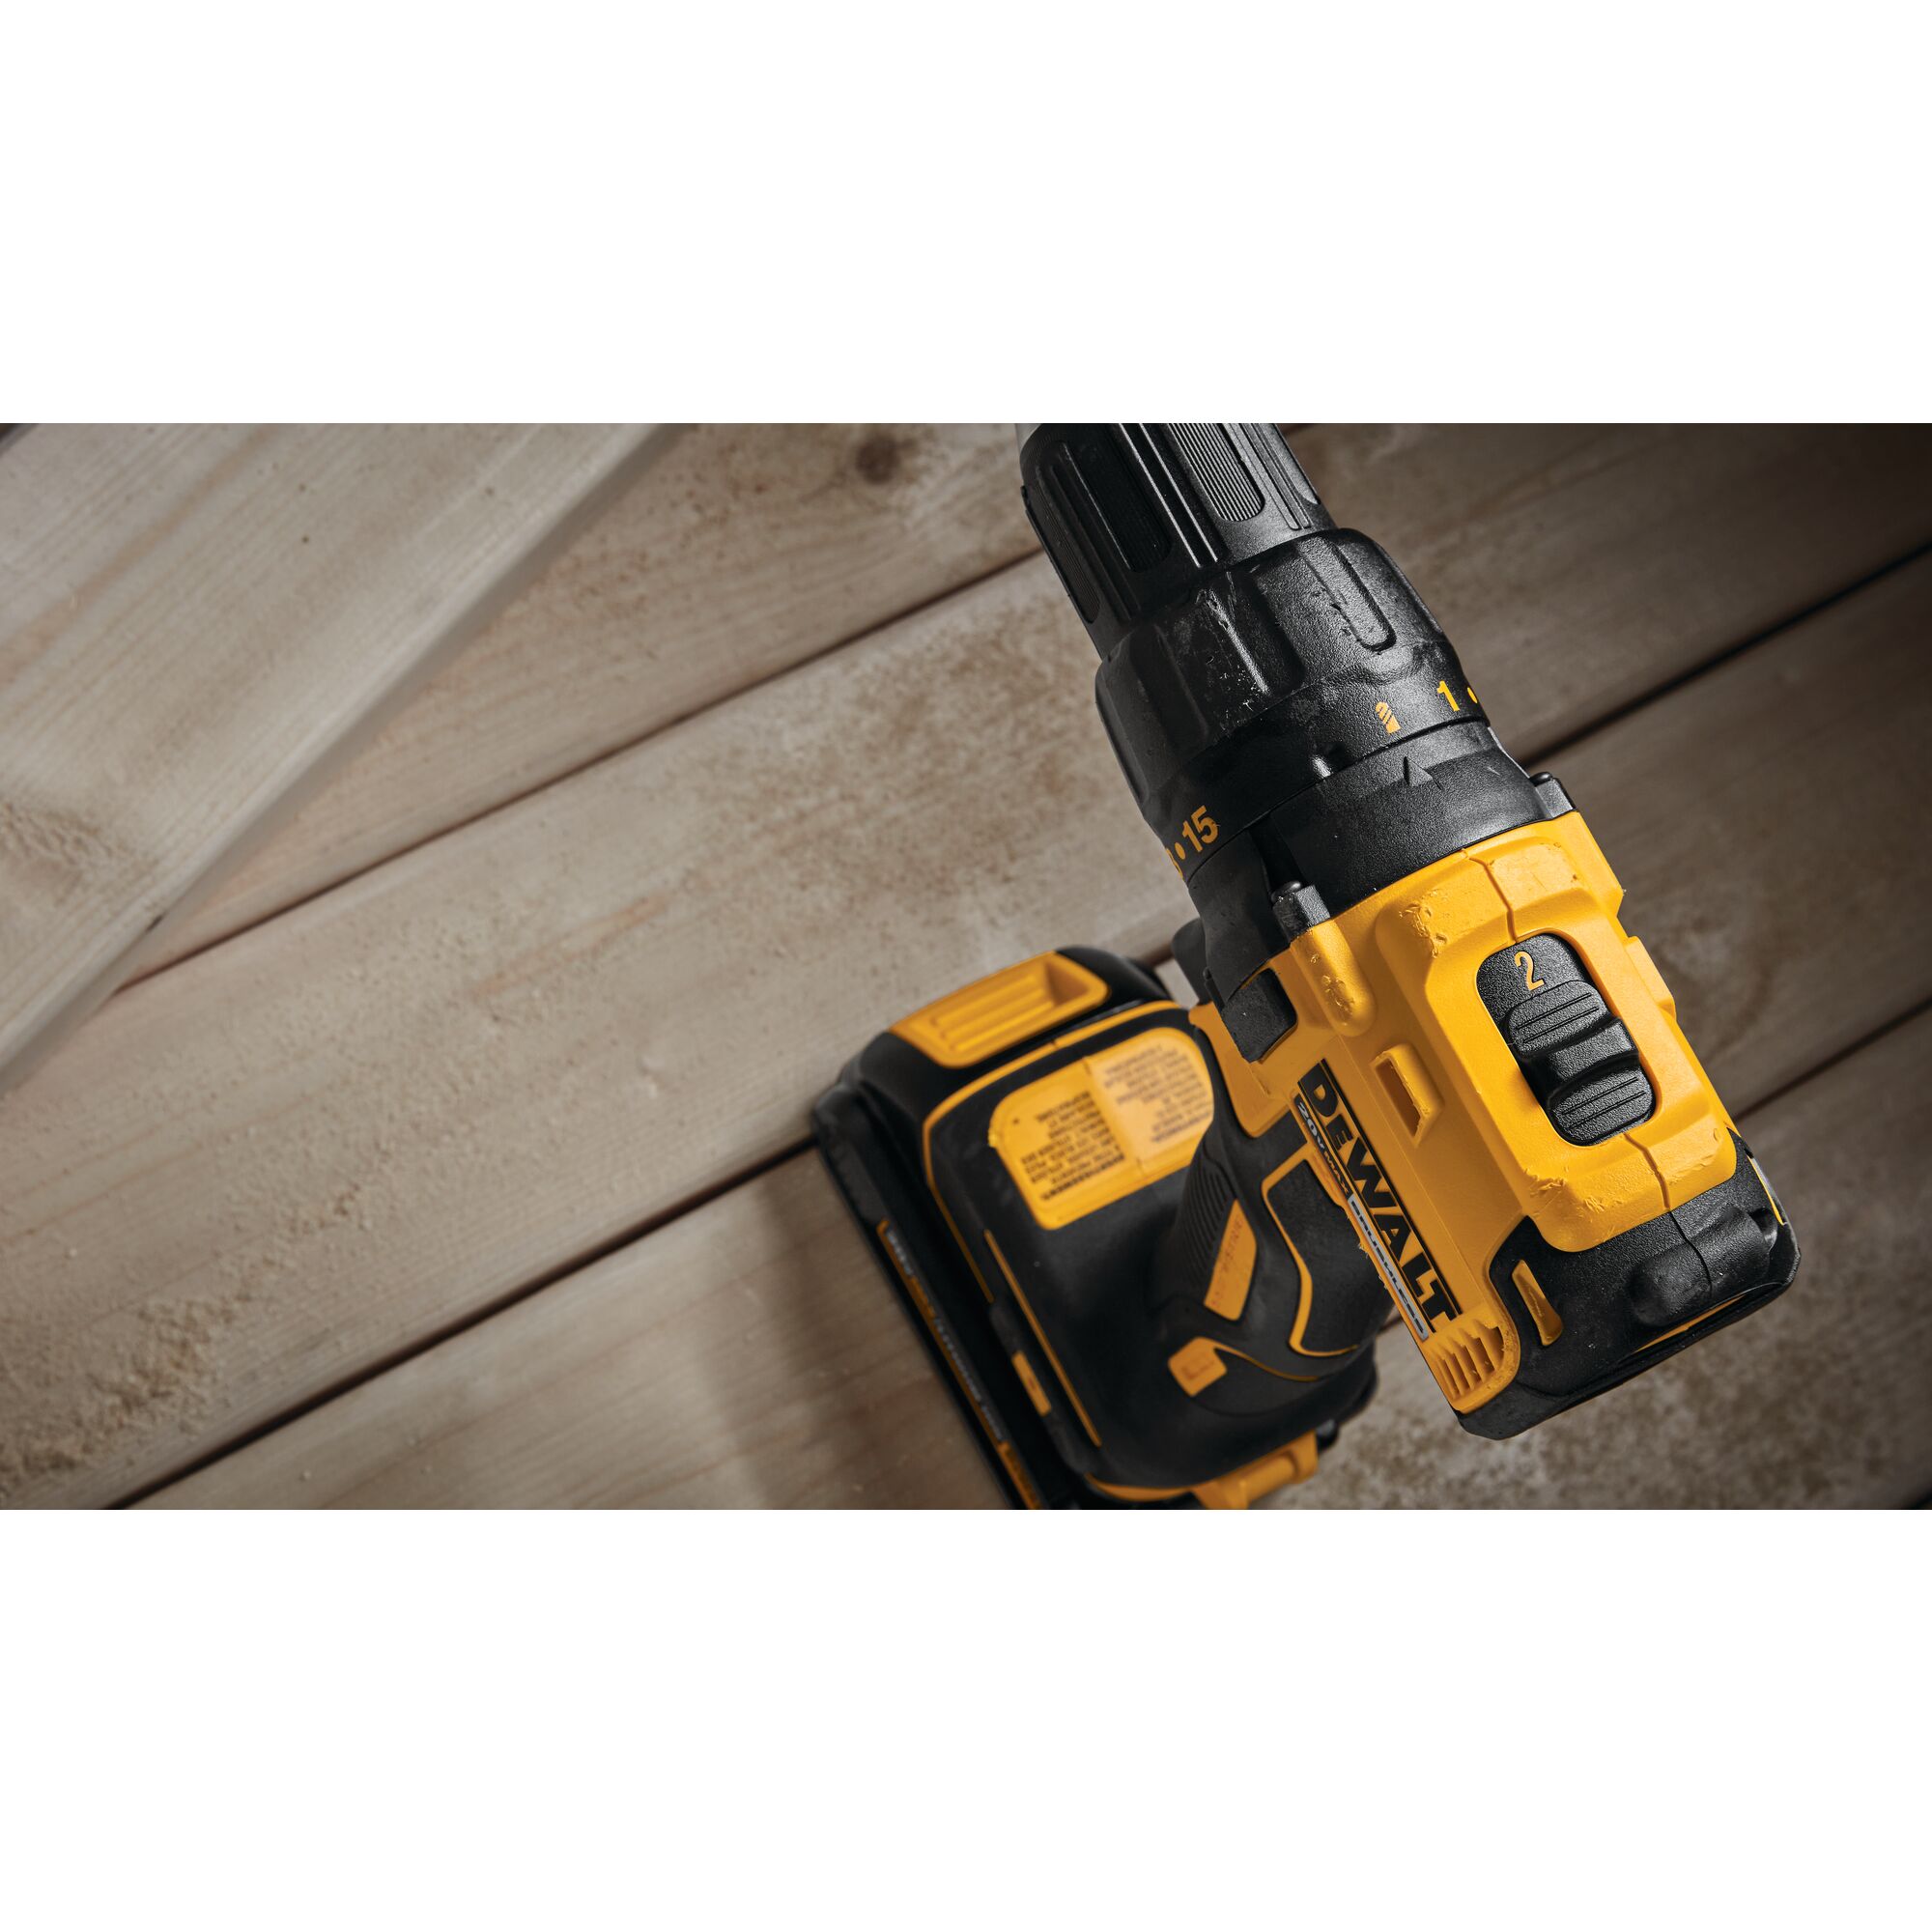 DEWALT DCK379D2 3-Tool 20-Volt Max Brushless Power Tool Combo Kit with Soft Case (2-Batteries and charger Included) - 3